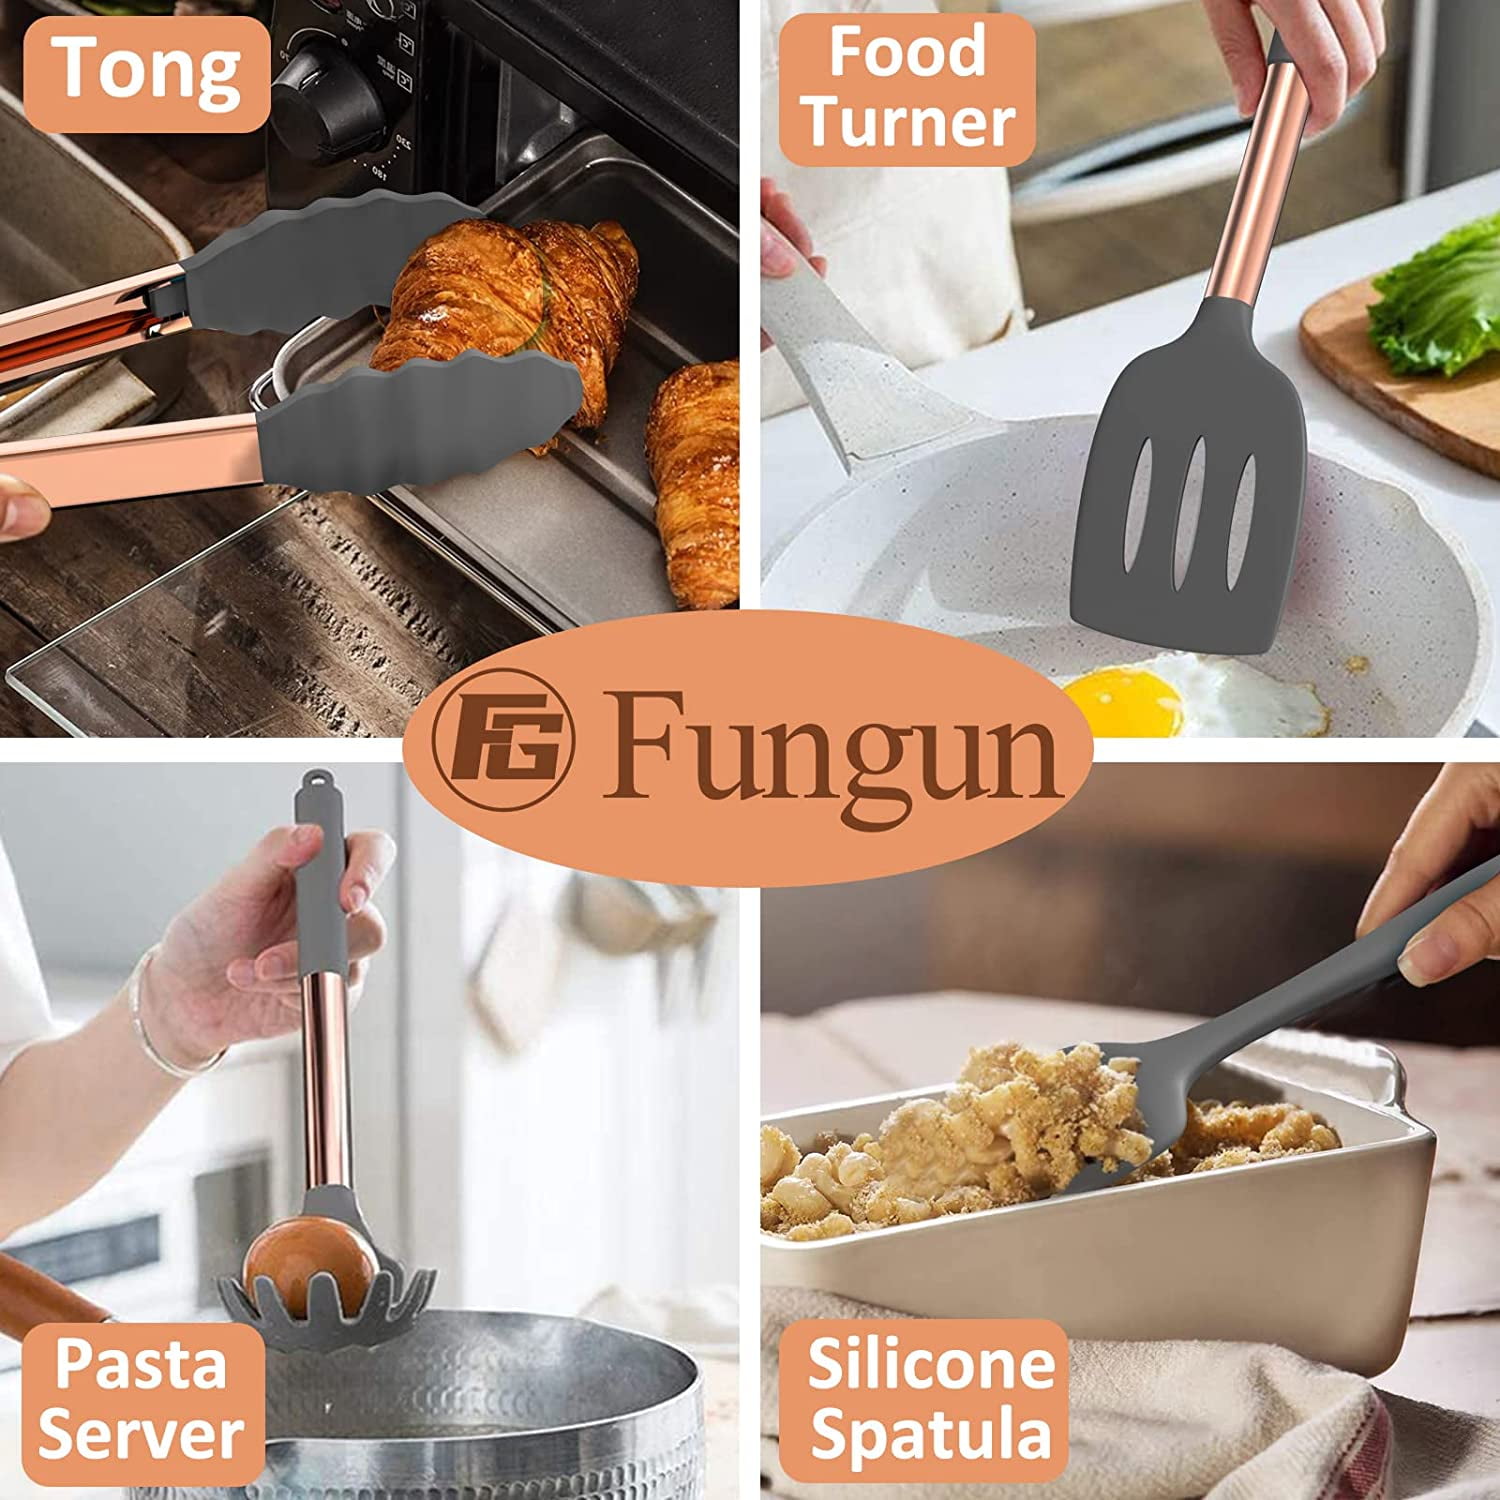 Silicone Cooking Utensil Set, 14pcs Kitchen Utensils Set Non-stick Heat  Resistant Cookware Copper Stainless Steel Handle Cooking Tools Turner Tongs  Spatula Spoo…